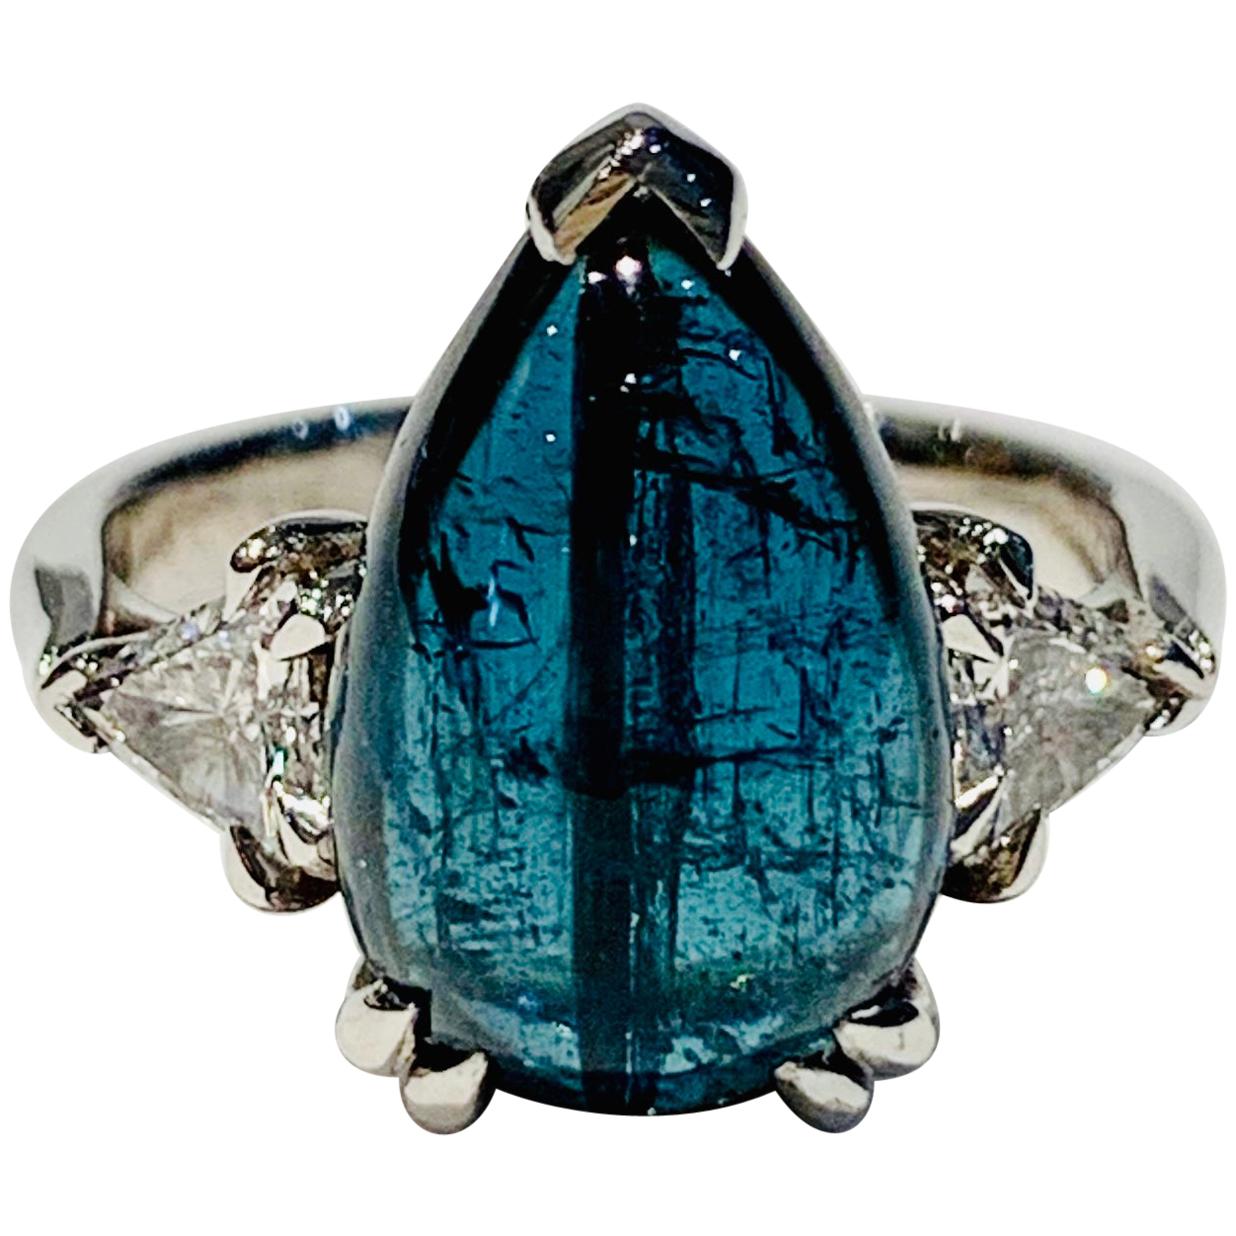 Bespoke 5.27ct Blue Tourmaline Pear Cut Cabochon Diamond Ring in 18ct White Gold For Sale